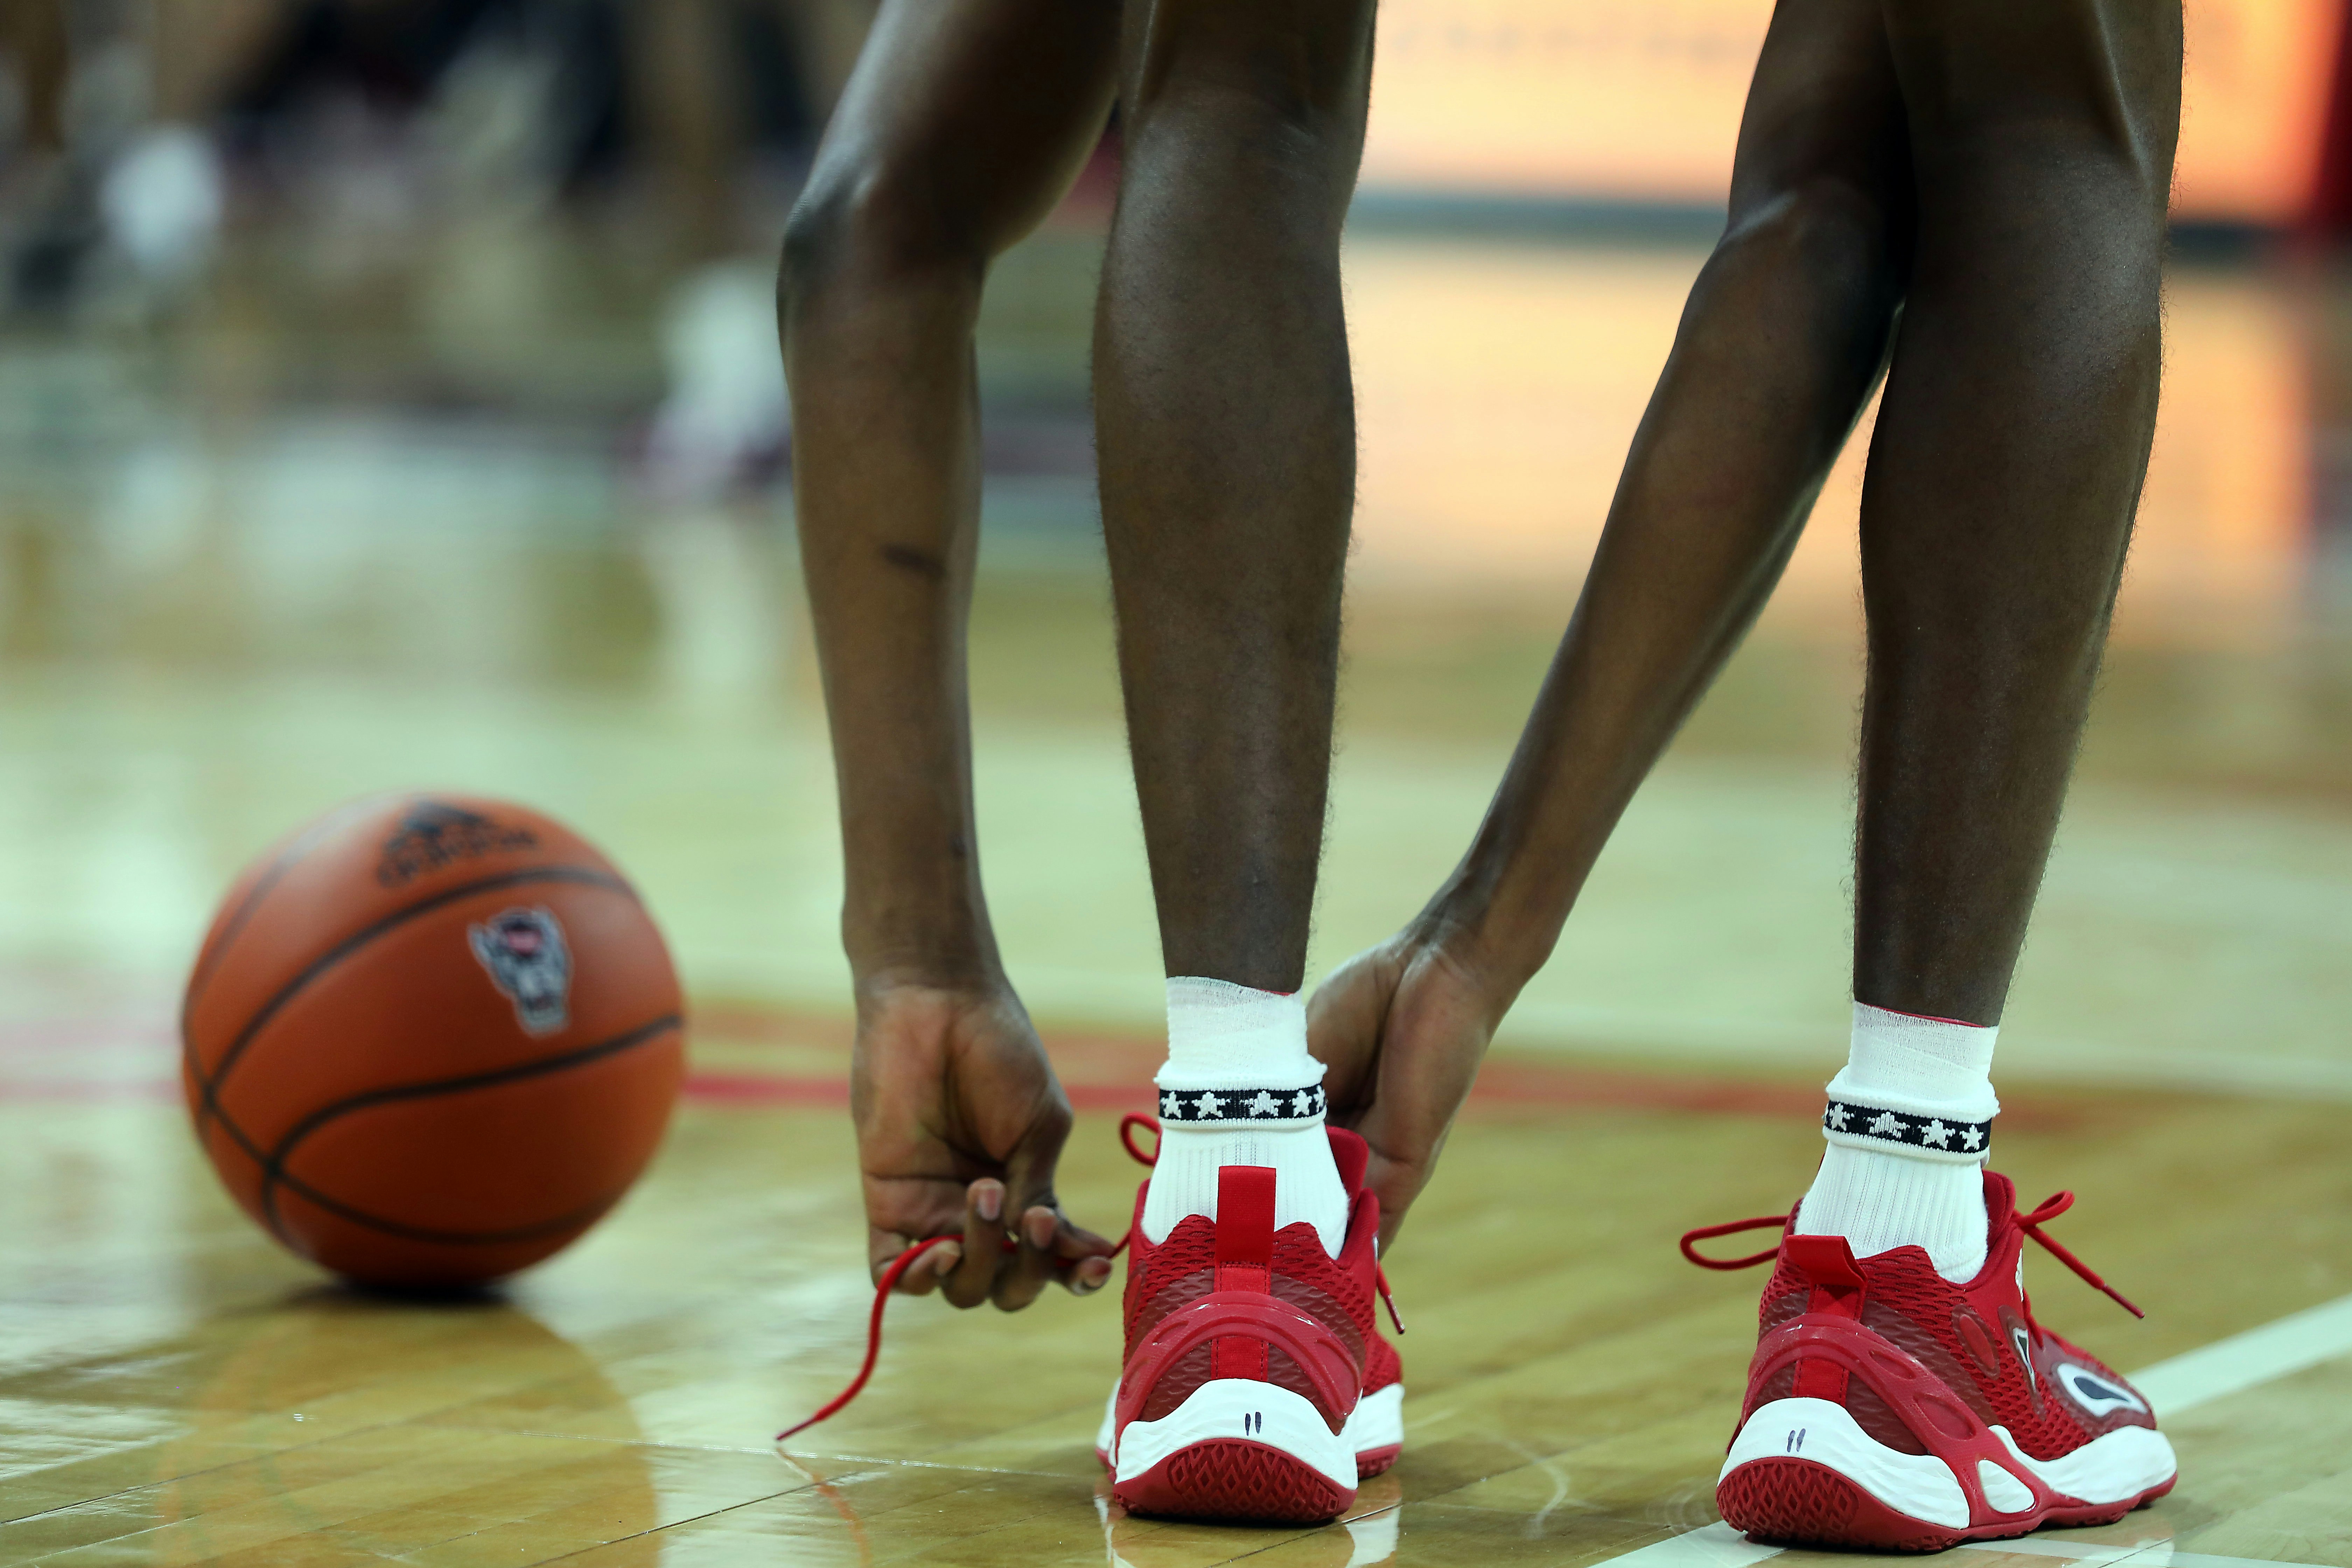 NC State basketball player ties shoelaces on sneakers during basketball game at PNC Arena in Raleigh, North Carolina.